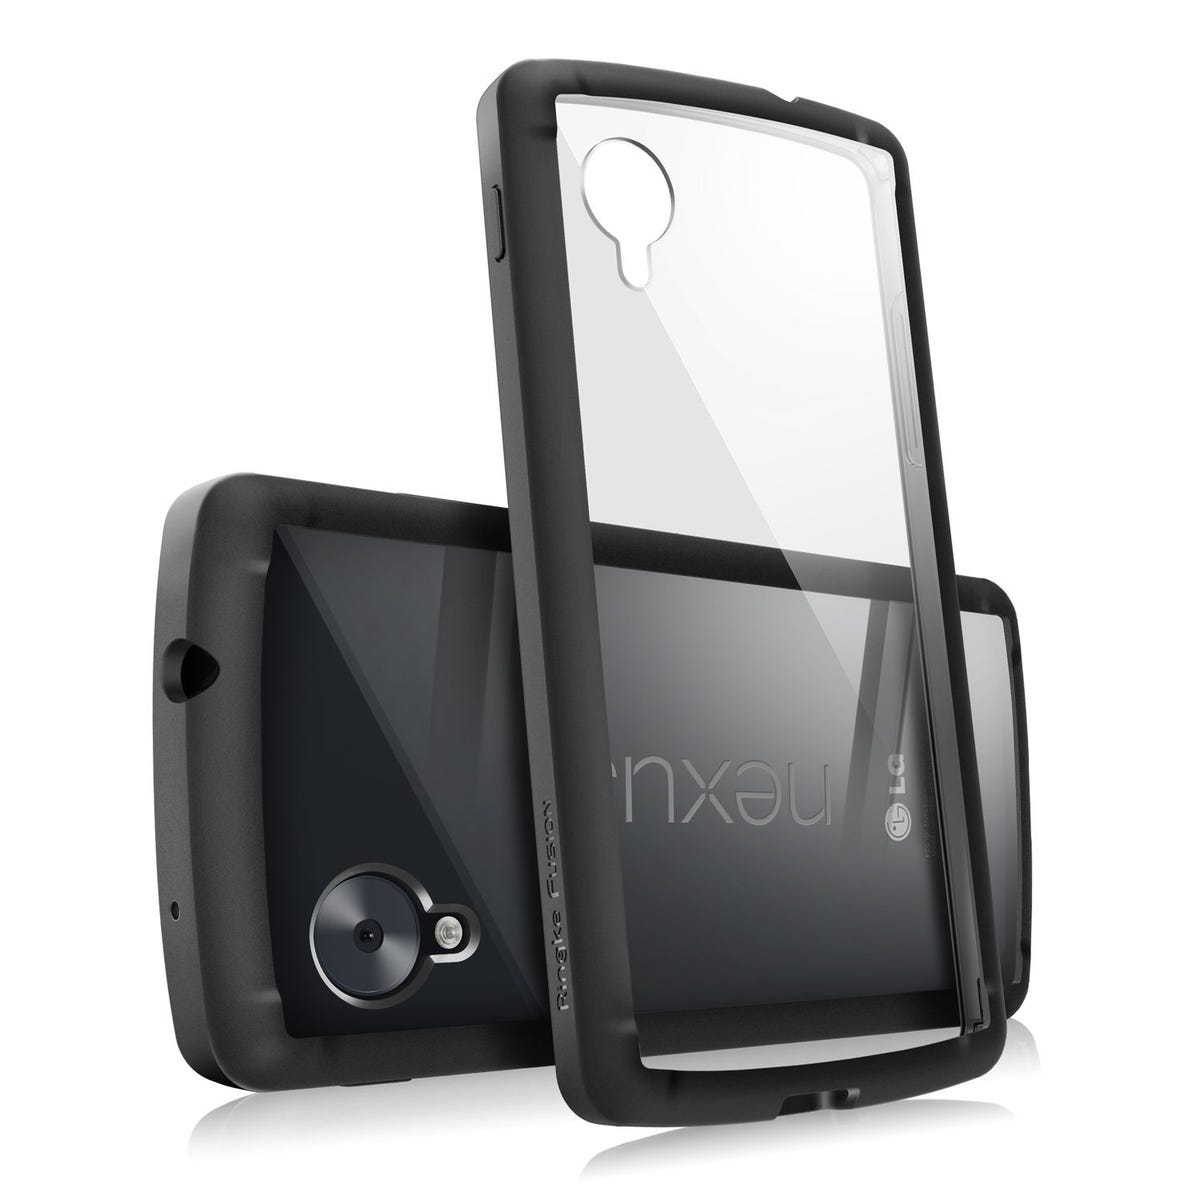 Amazon is selling this Ringke Fusion case for the purported Google Nexus 5 phone.